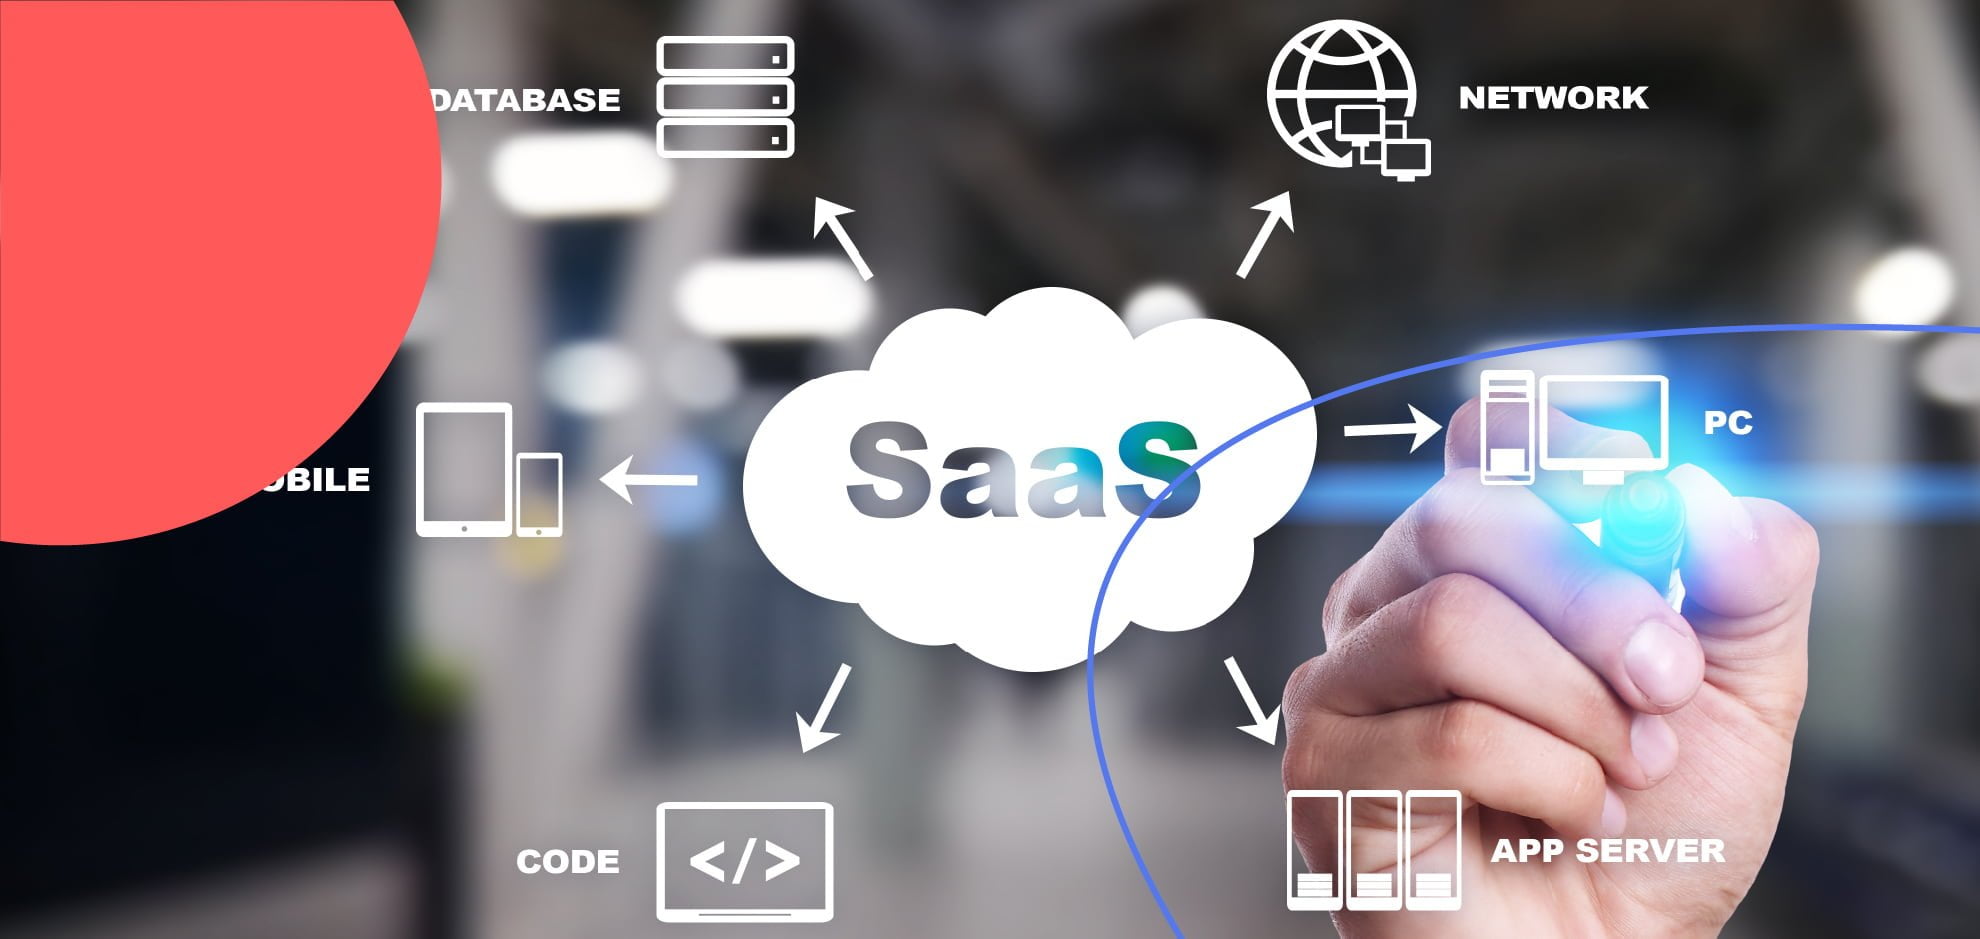 saas business exit strategy guide